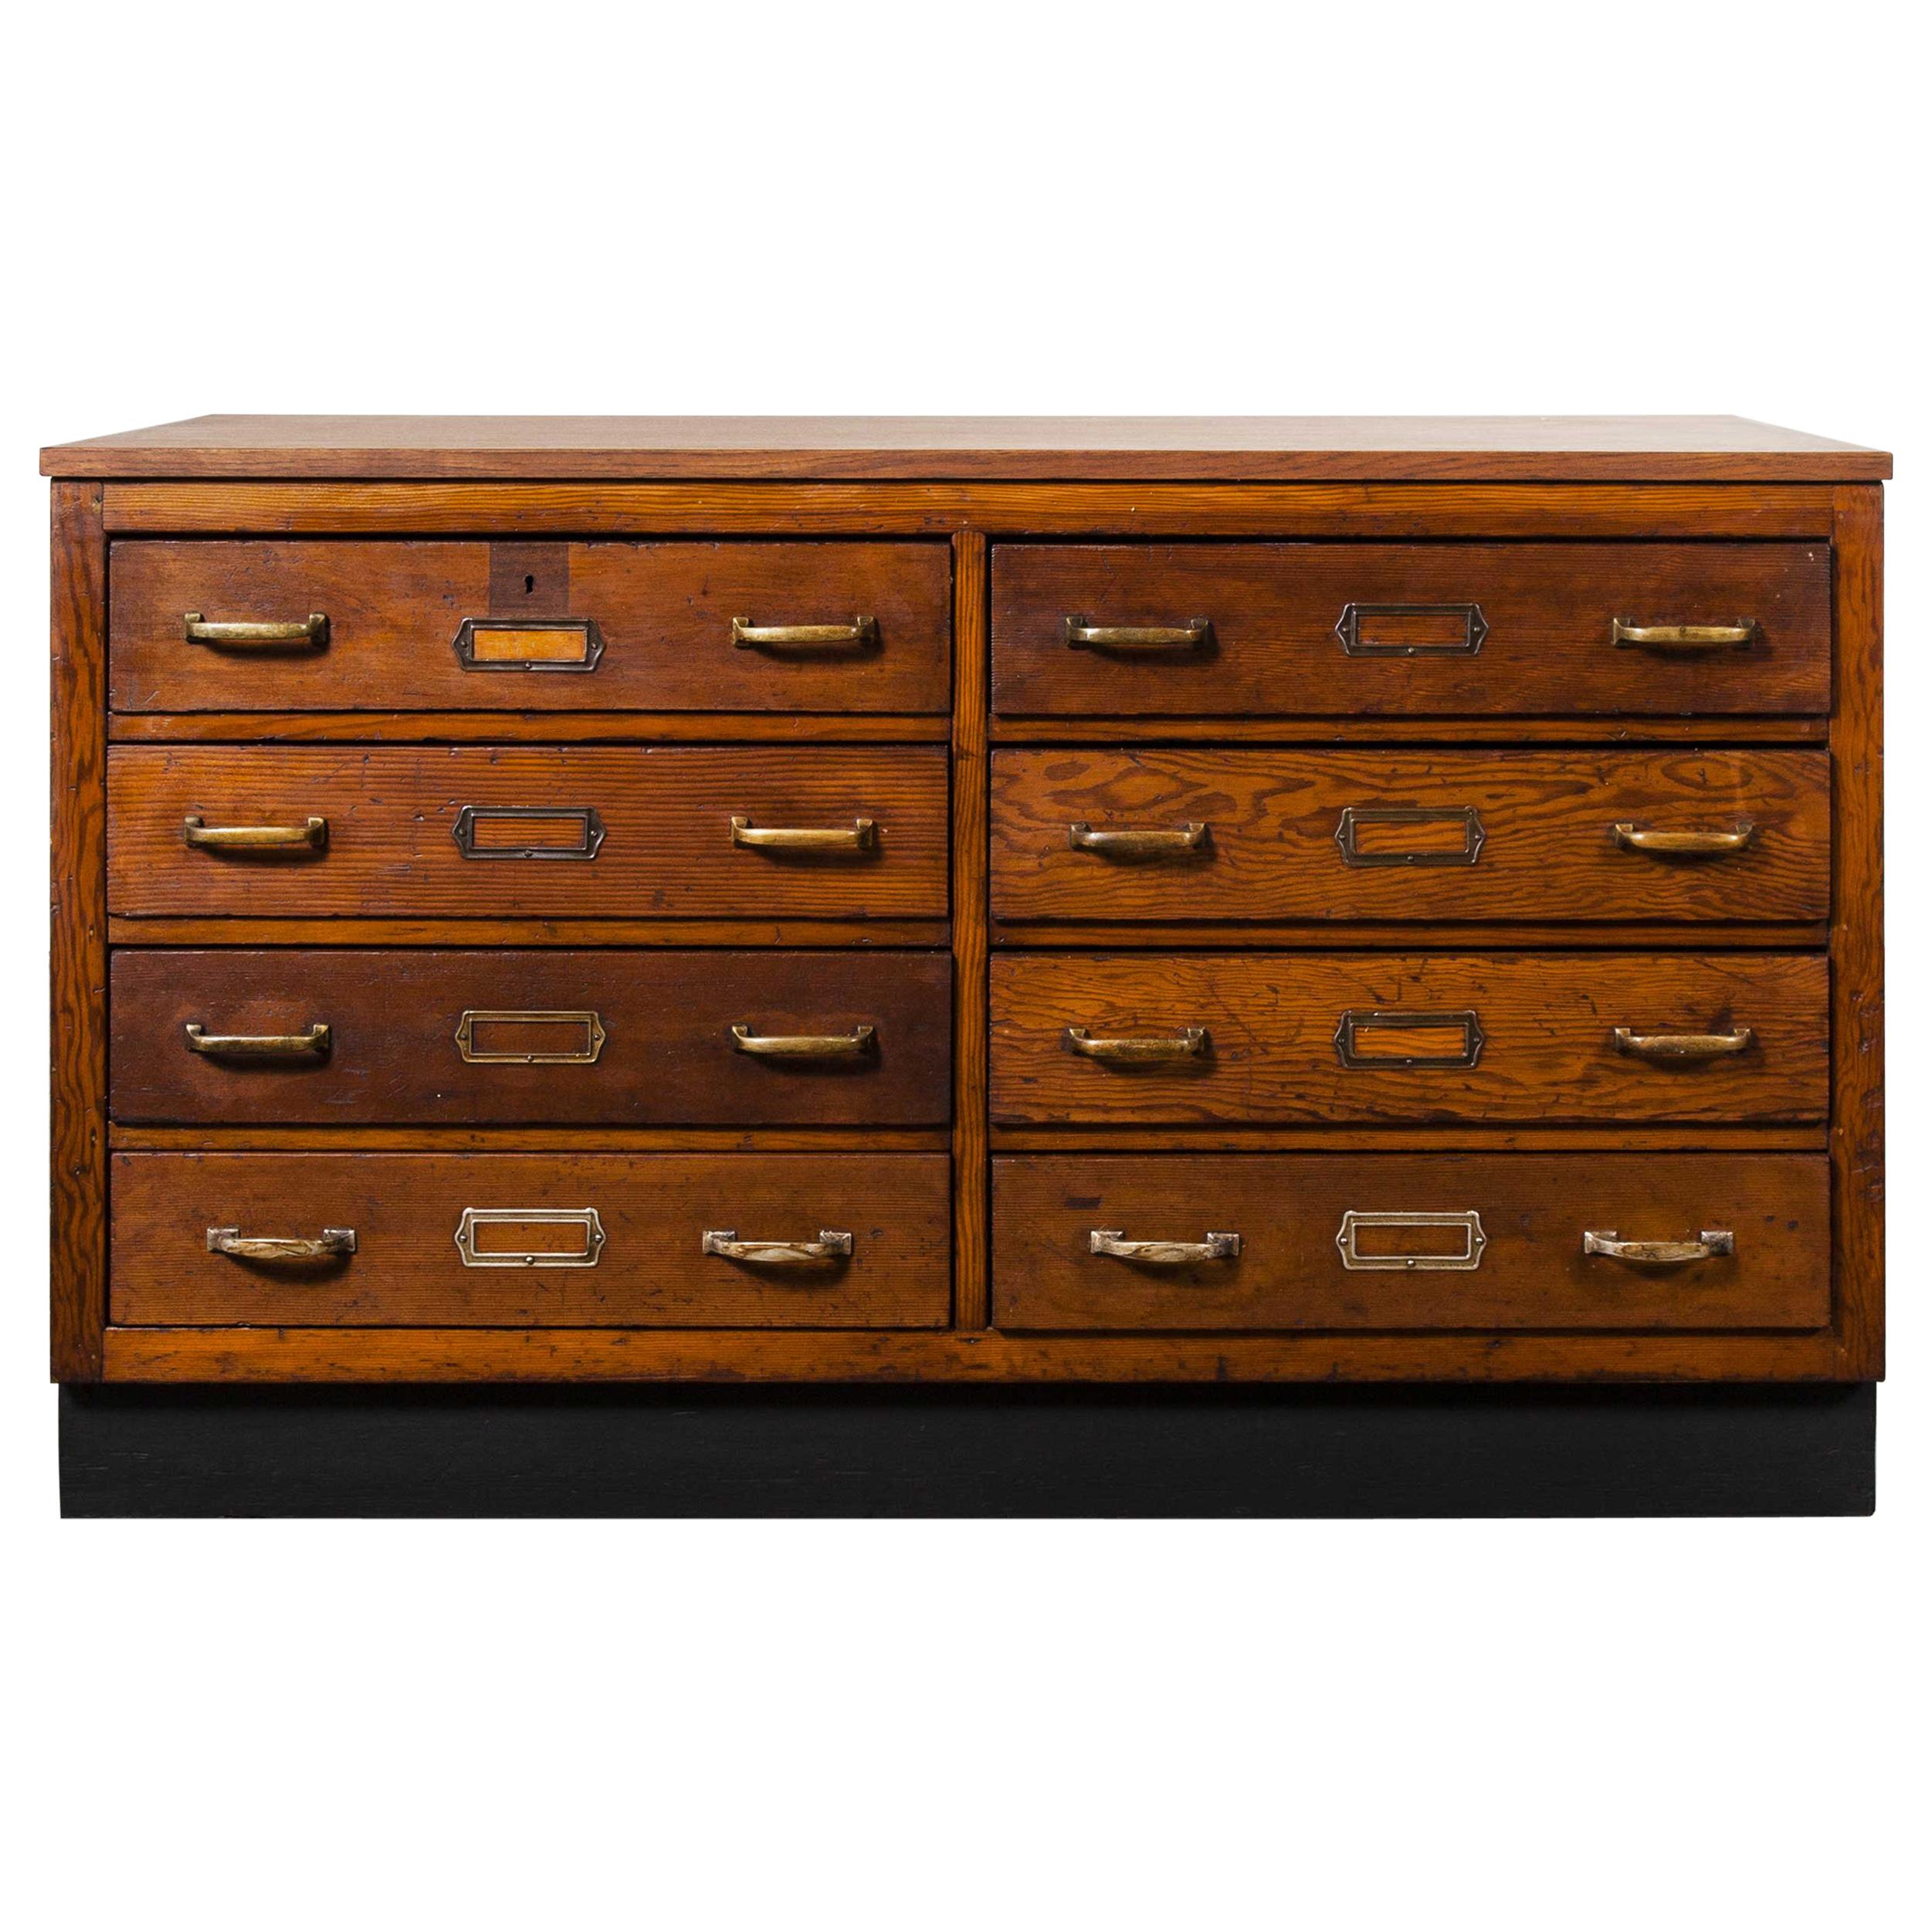 1940s Low Pitch Pine Chest of Drawers, Eight Drawers